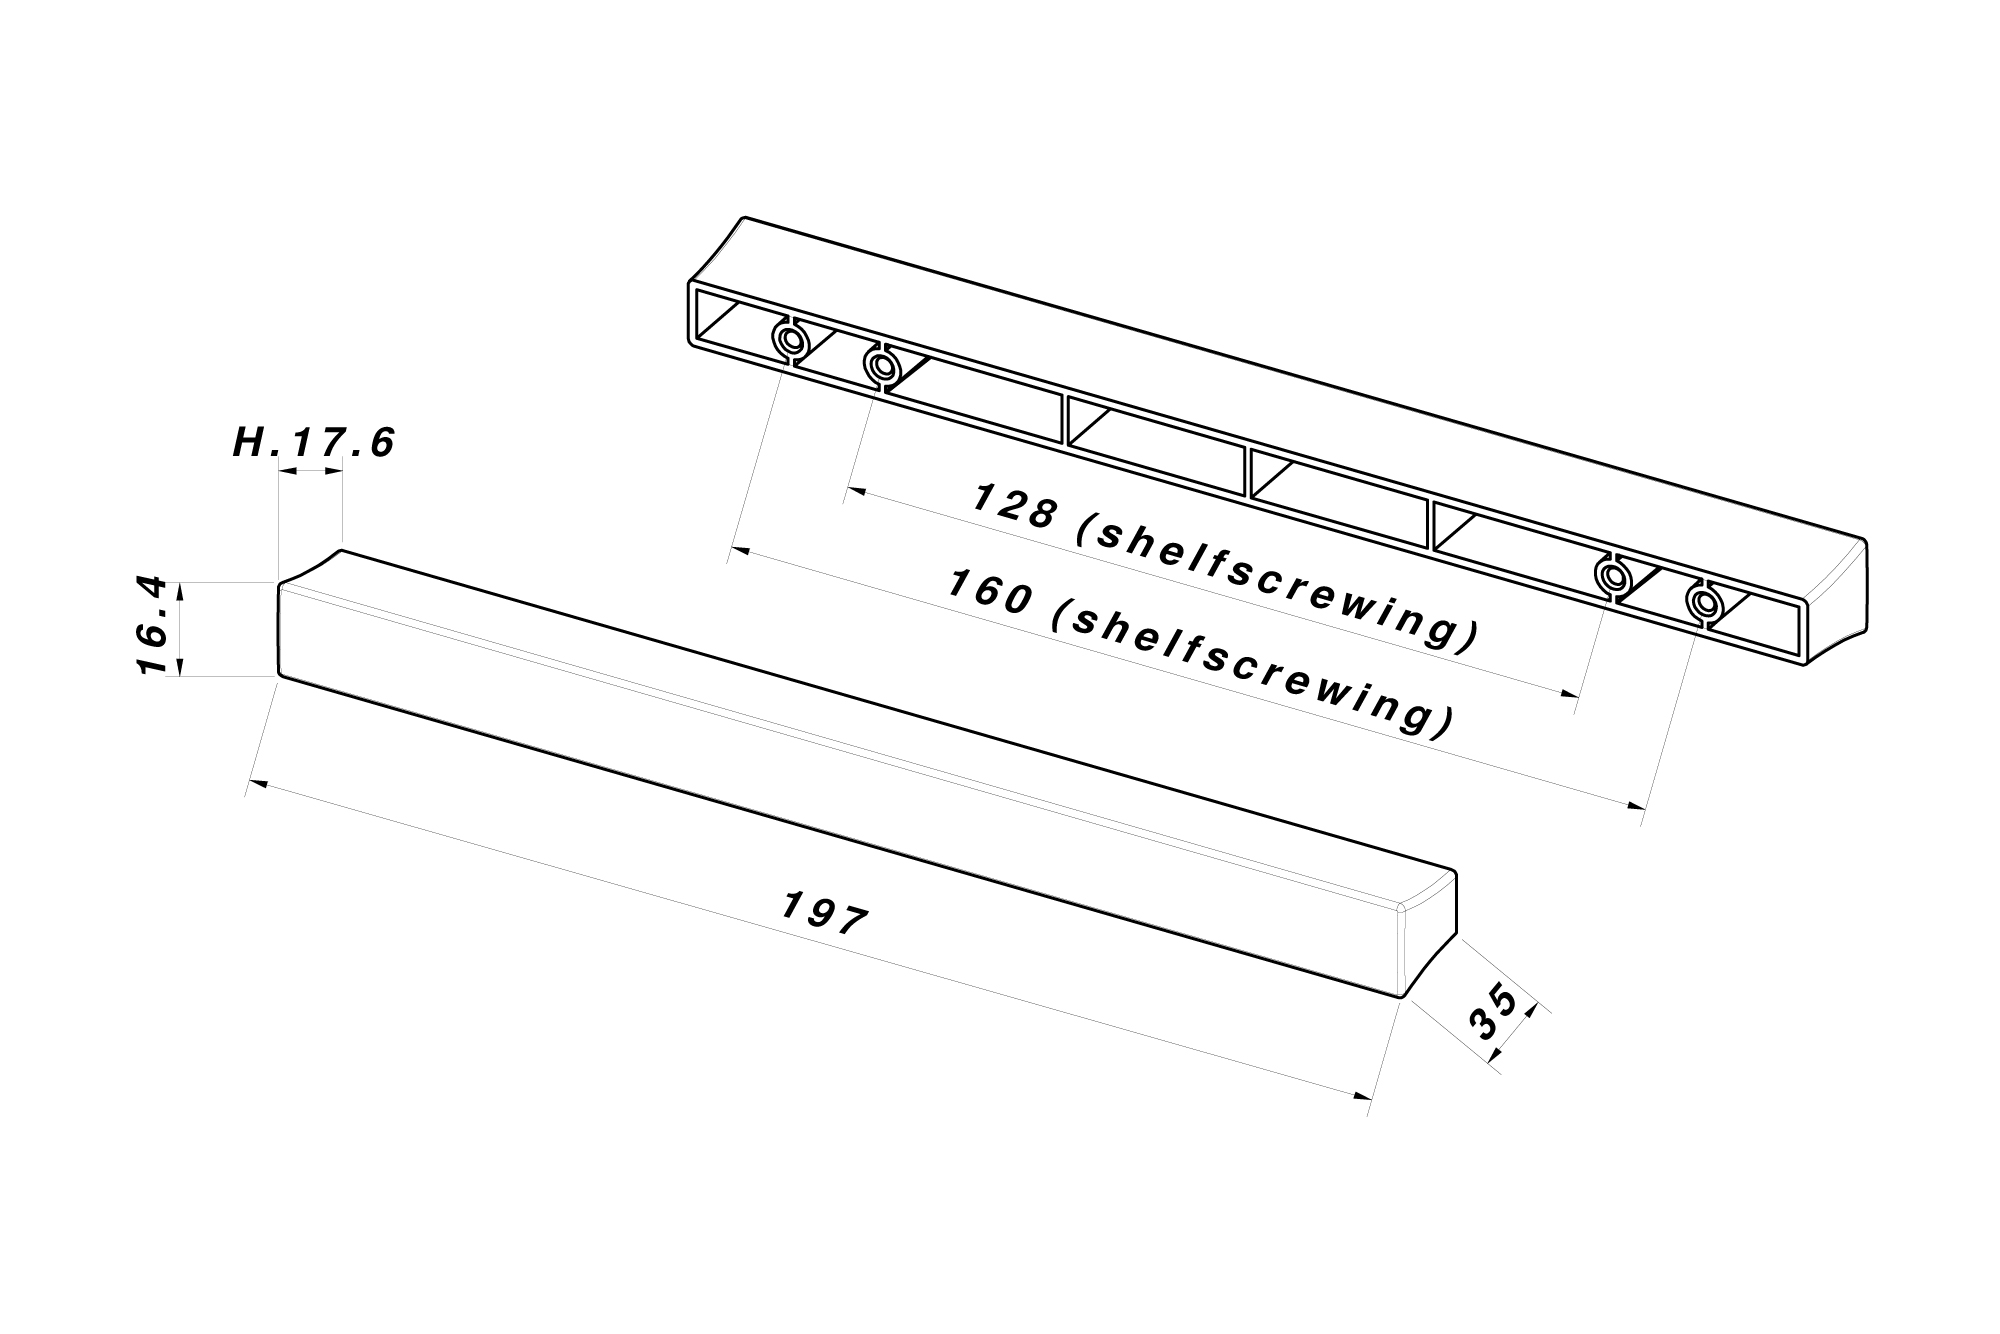 M2280 - Technical drawing